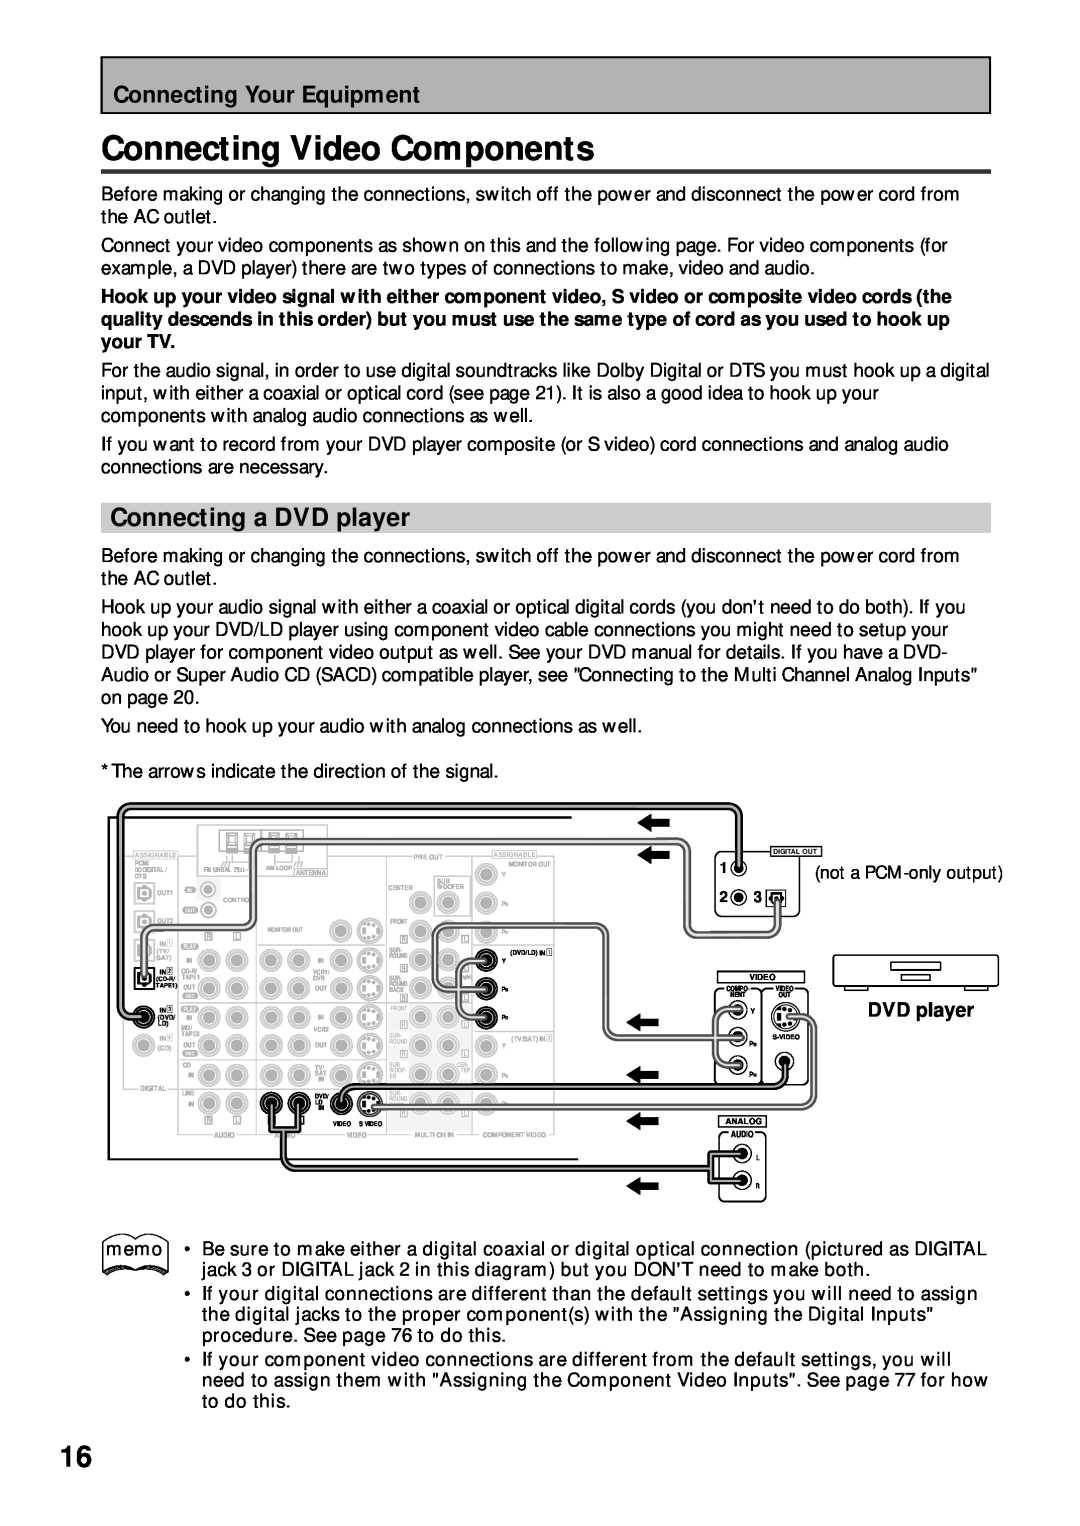 Pioneer VSX-43TX operating instructions Connecting Video Components, Connecting a DVD player, Connecting Your Equipment 